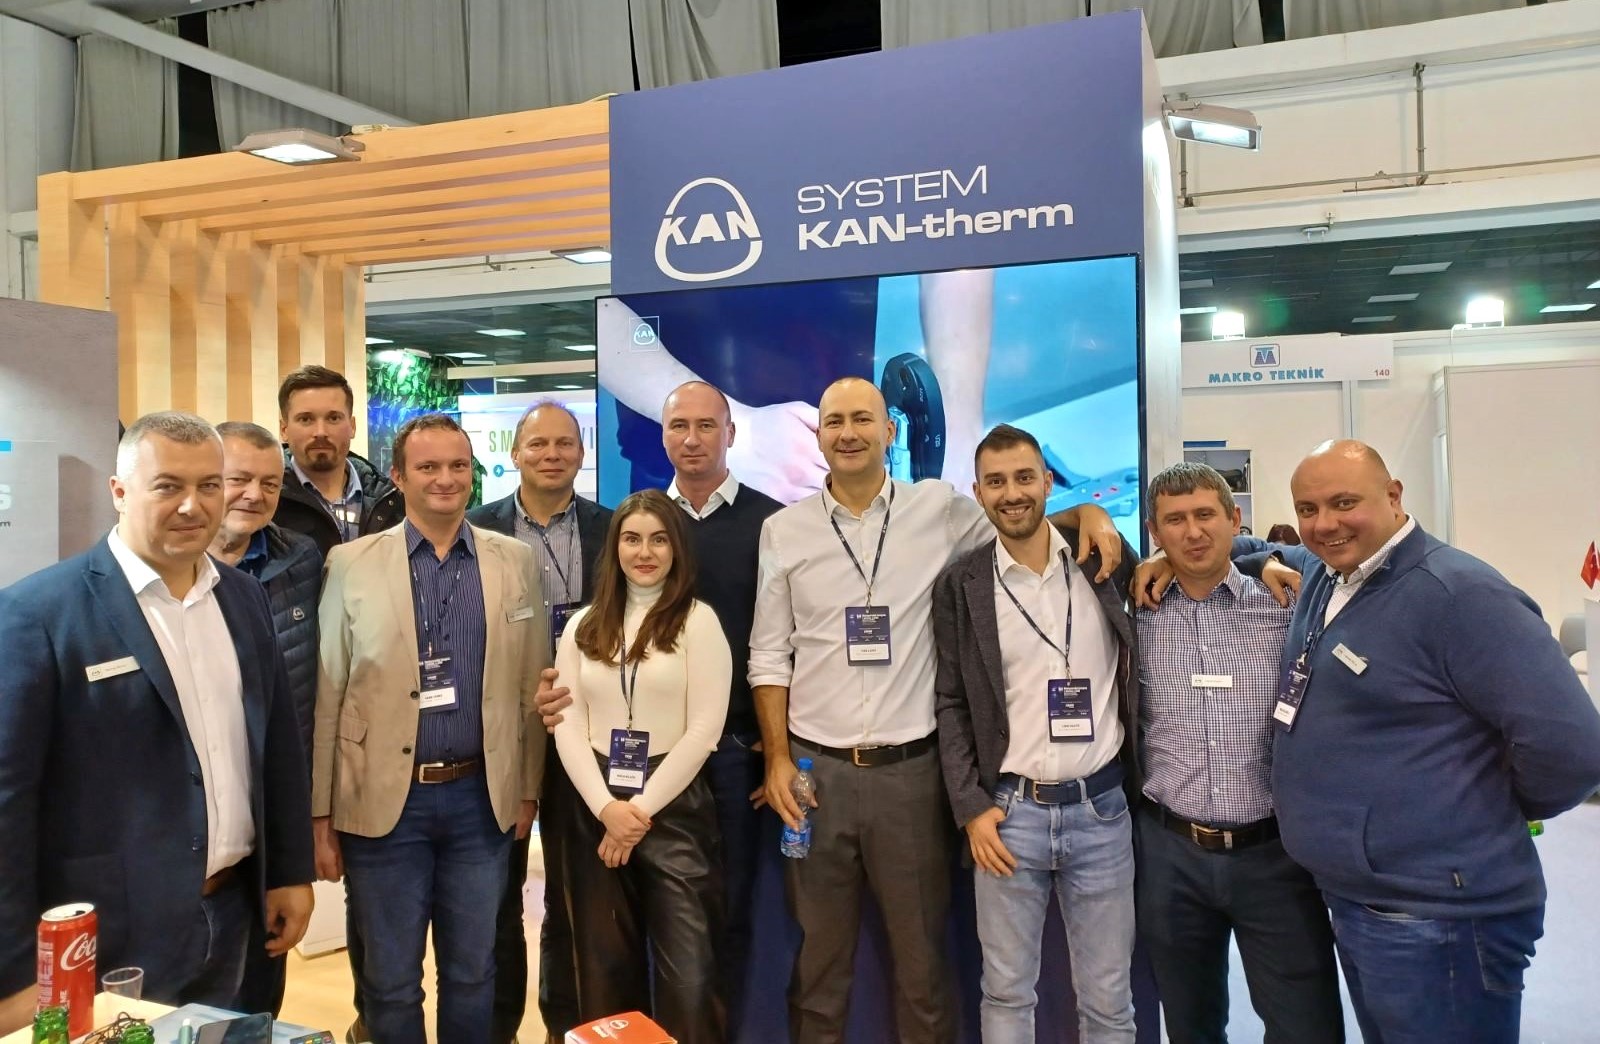 KAN Group at the 54th International HVAC&R Congress and Exhibition in Belgrade.